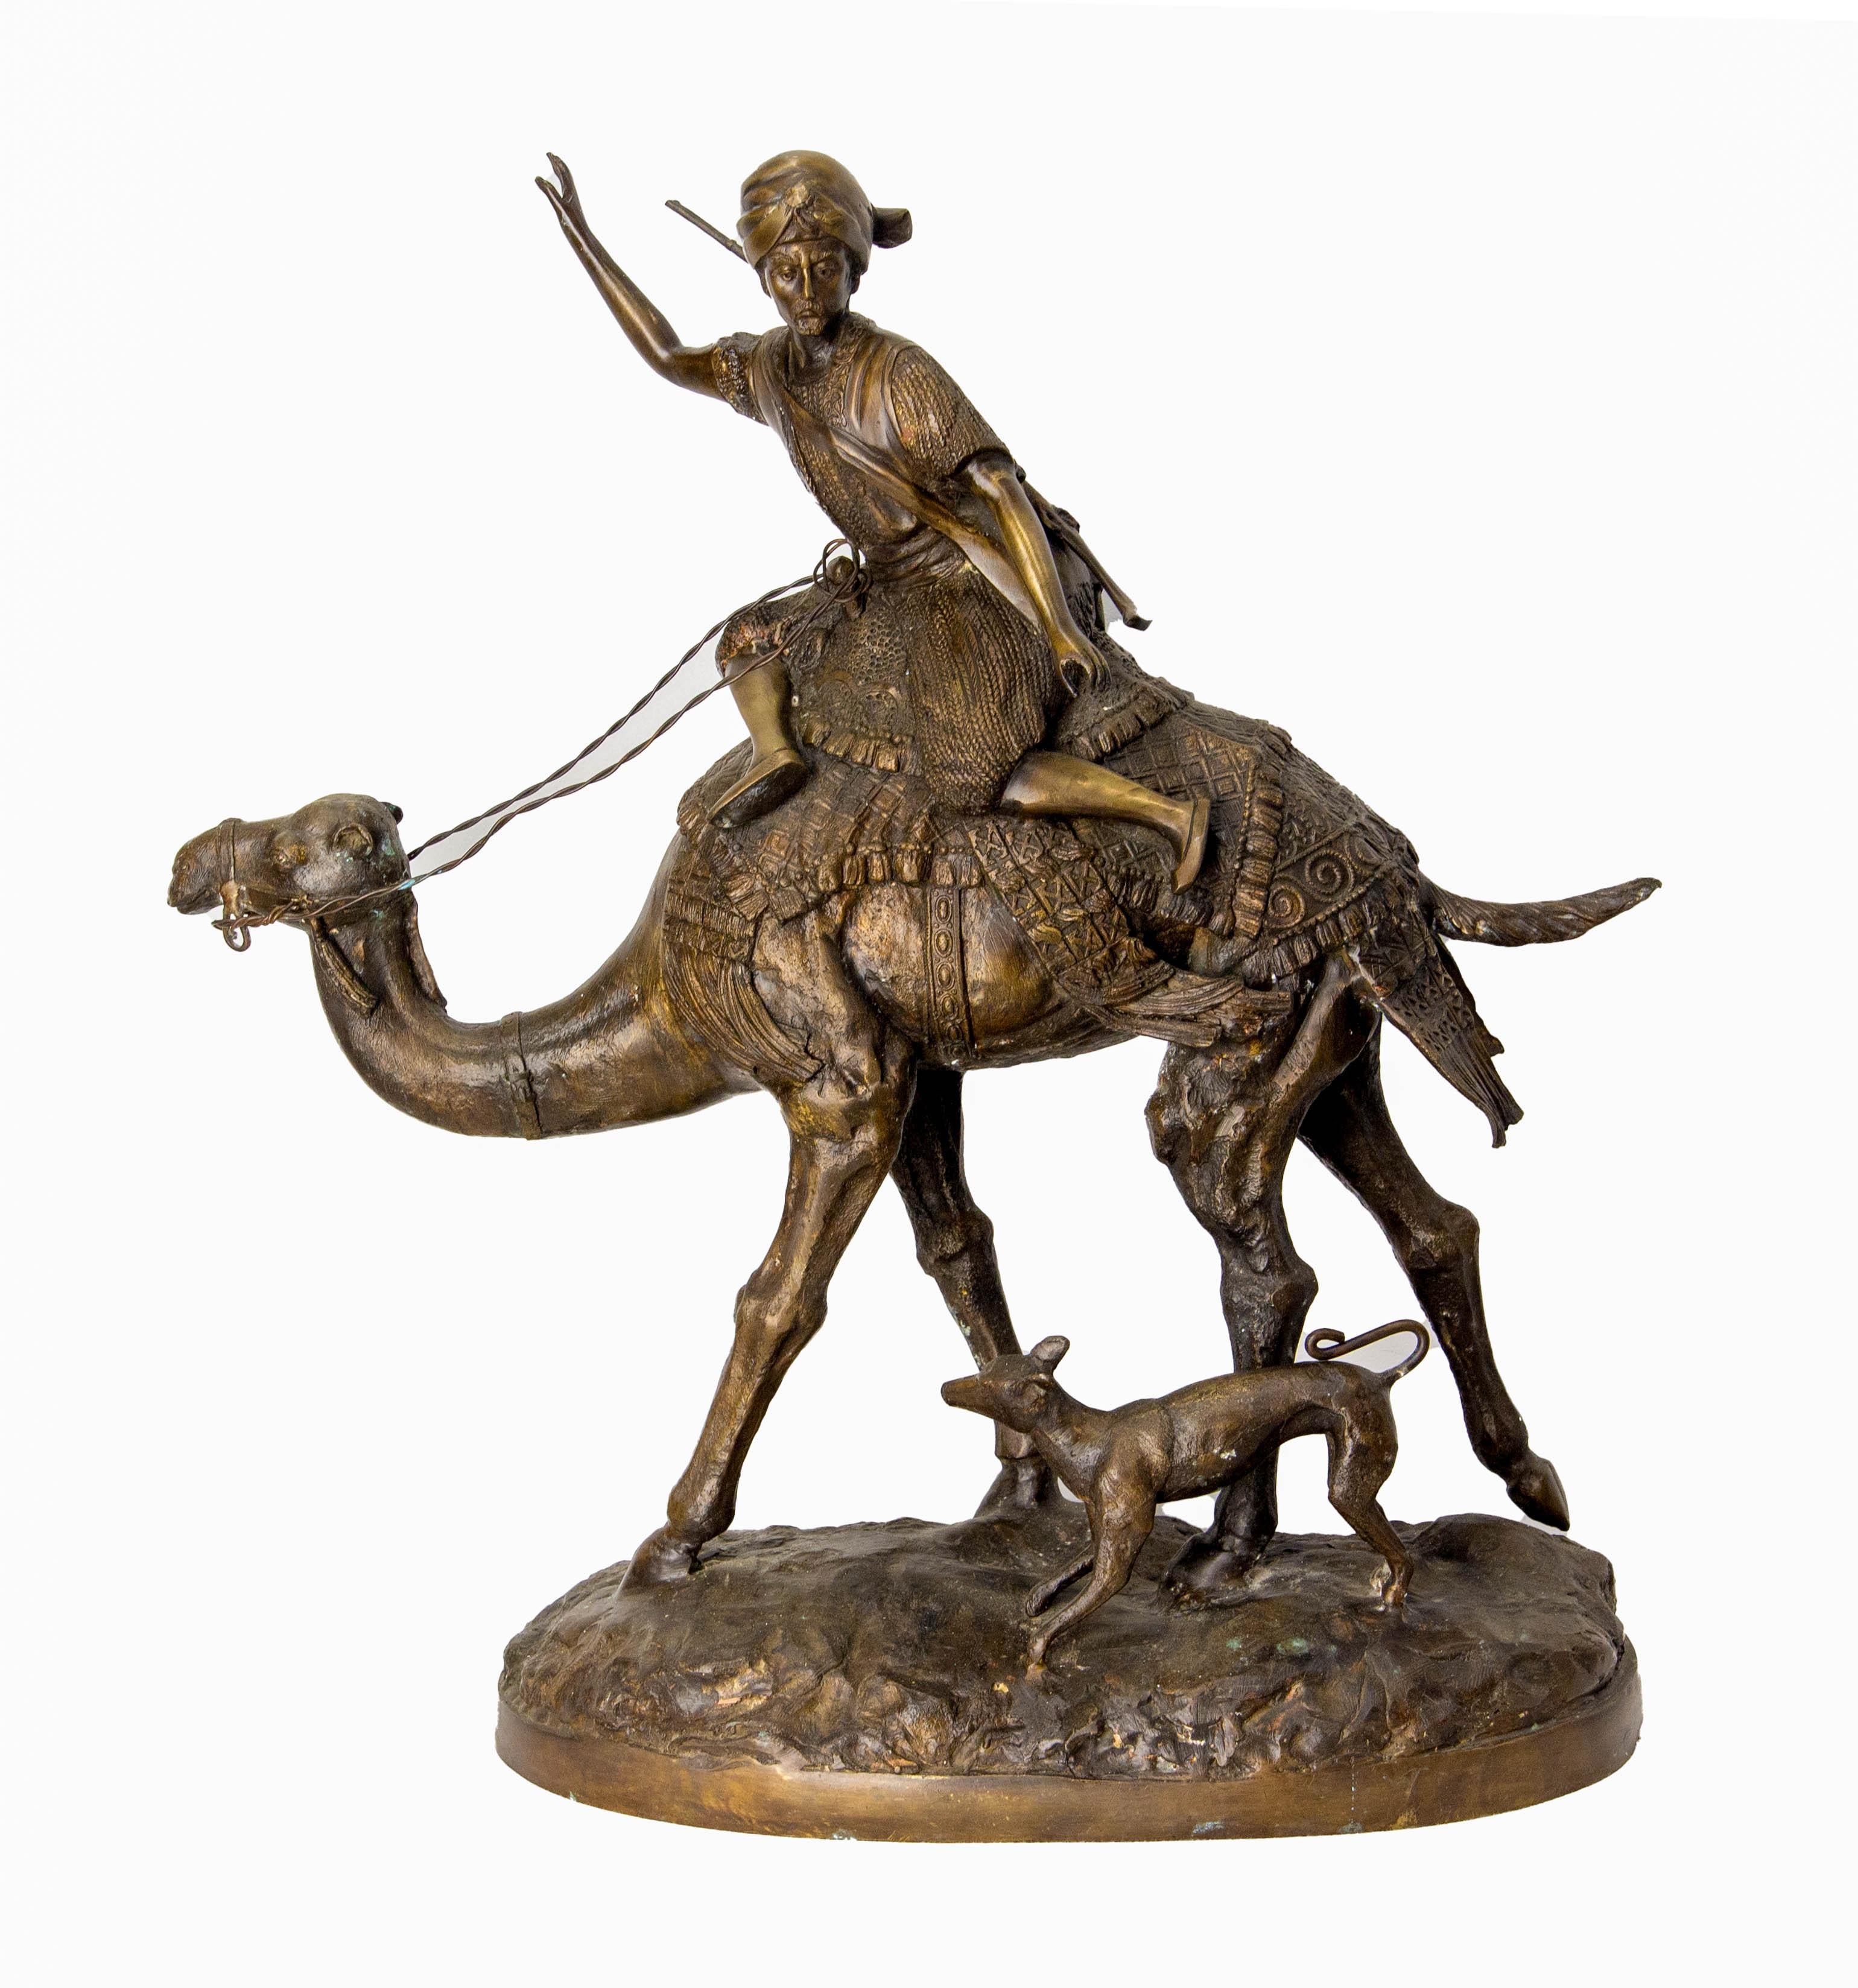 French  bronze hunter camel and dog statue.
Very nice treatment of the subject in a detailed and nervous classic style with a high quality of details. 
Very expressive face and body posture of the character who gives the feeling of being completely